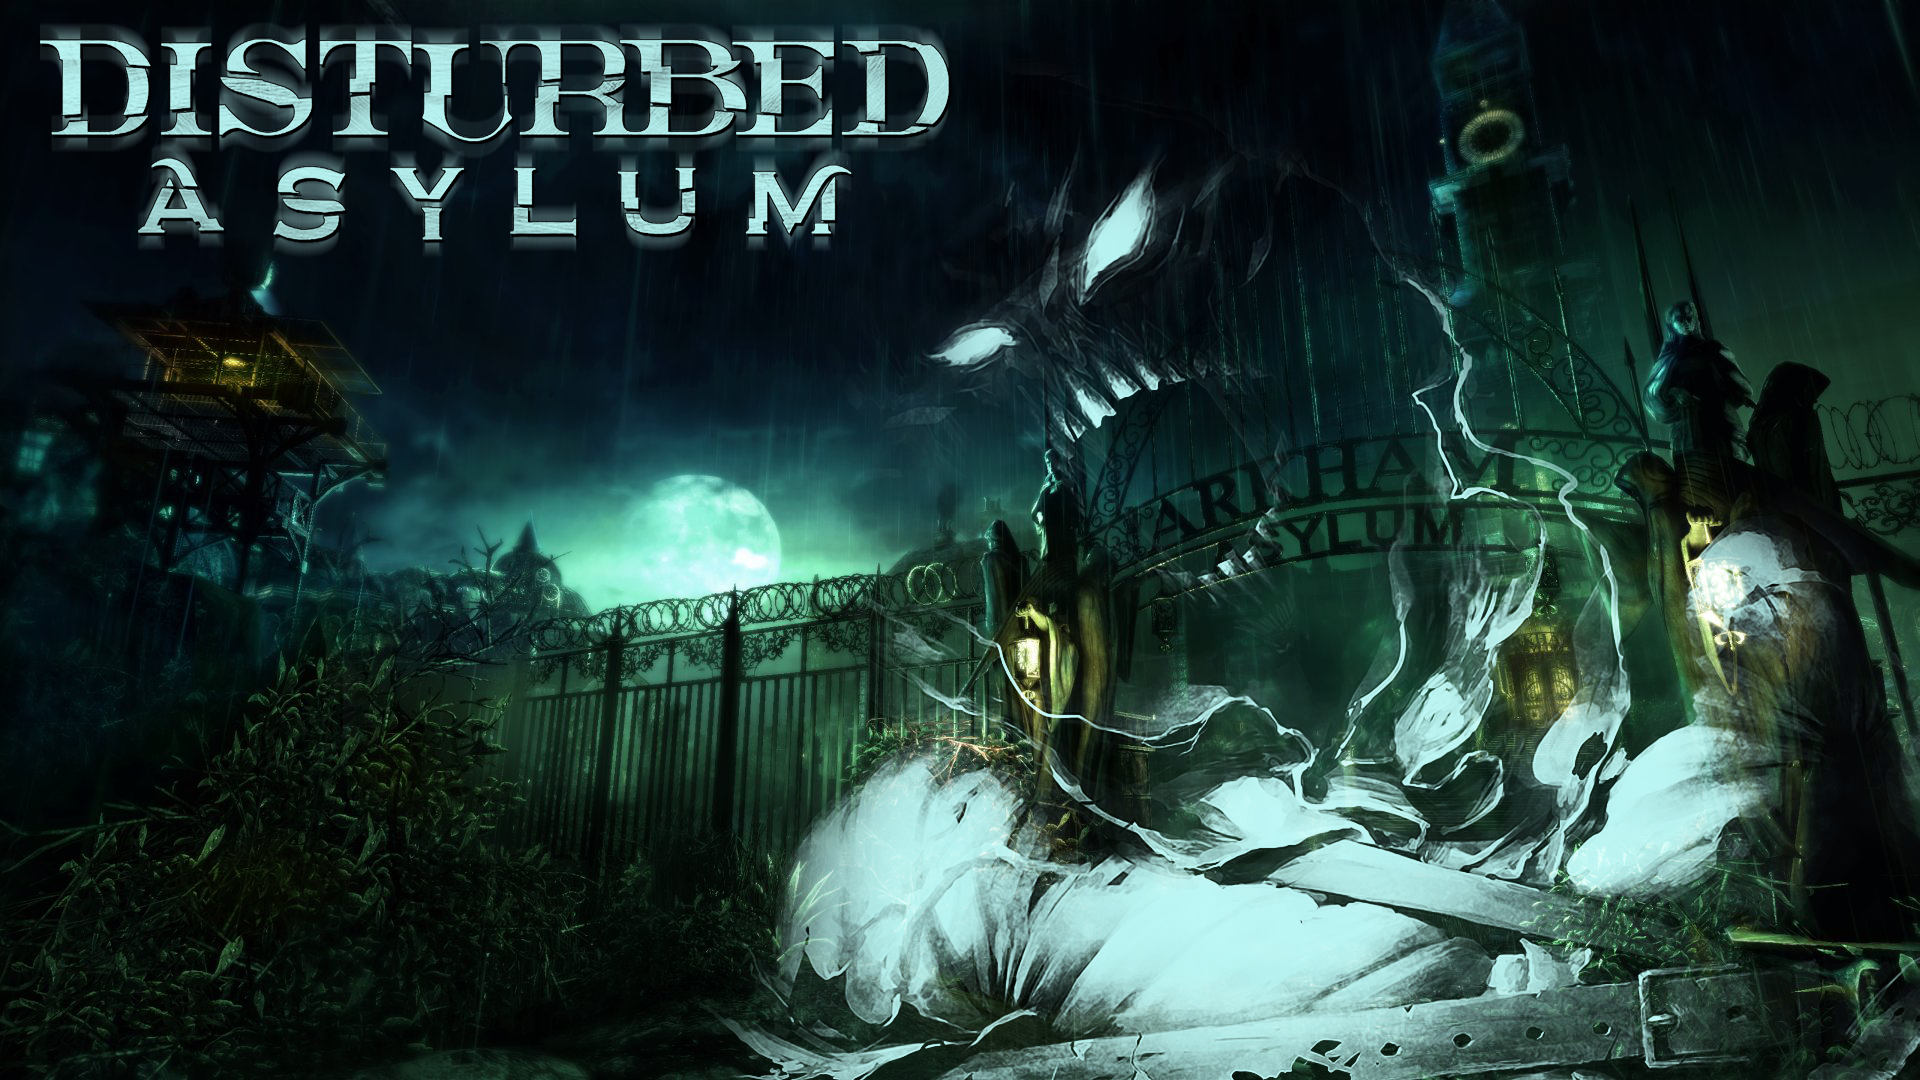 Wallpapers of Disturbed in high quality - Metal band backgrounds